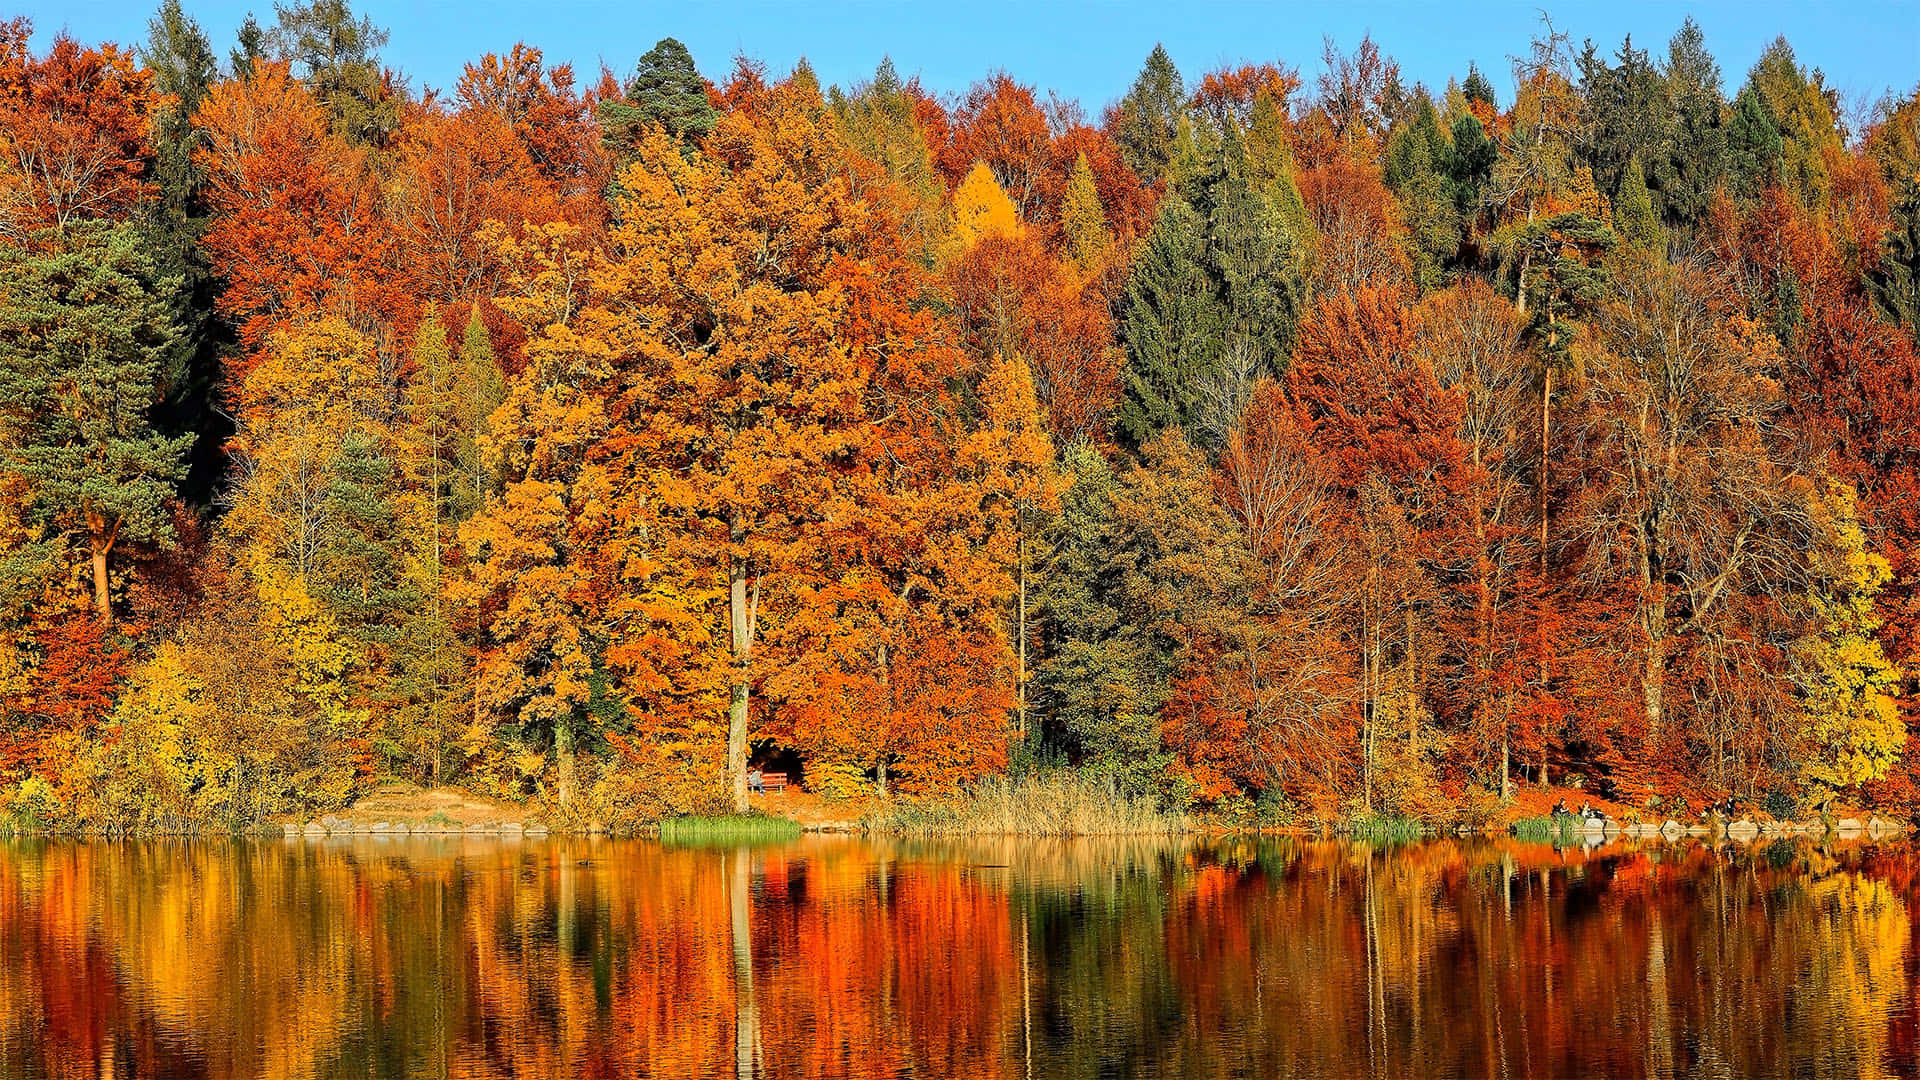 Enjoy the Splendid Colors of Nature This Fall